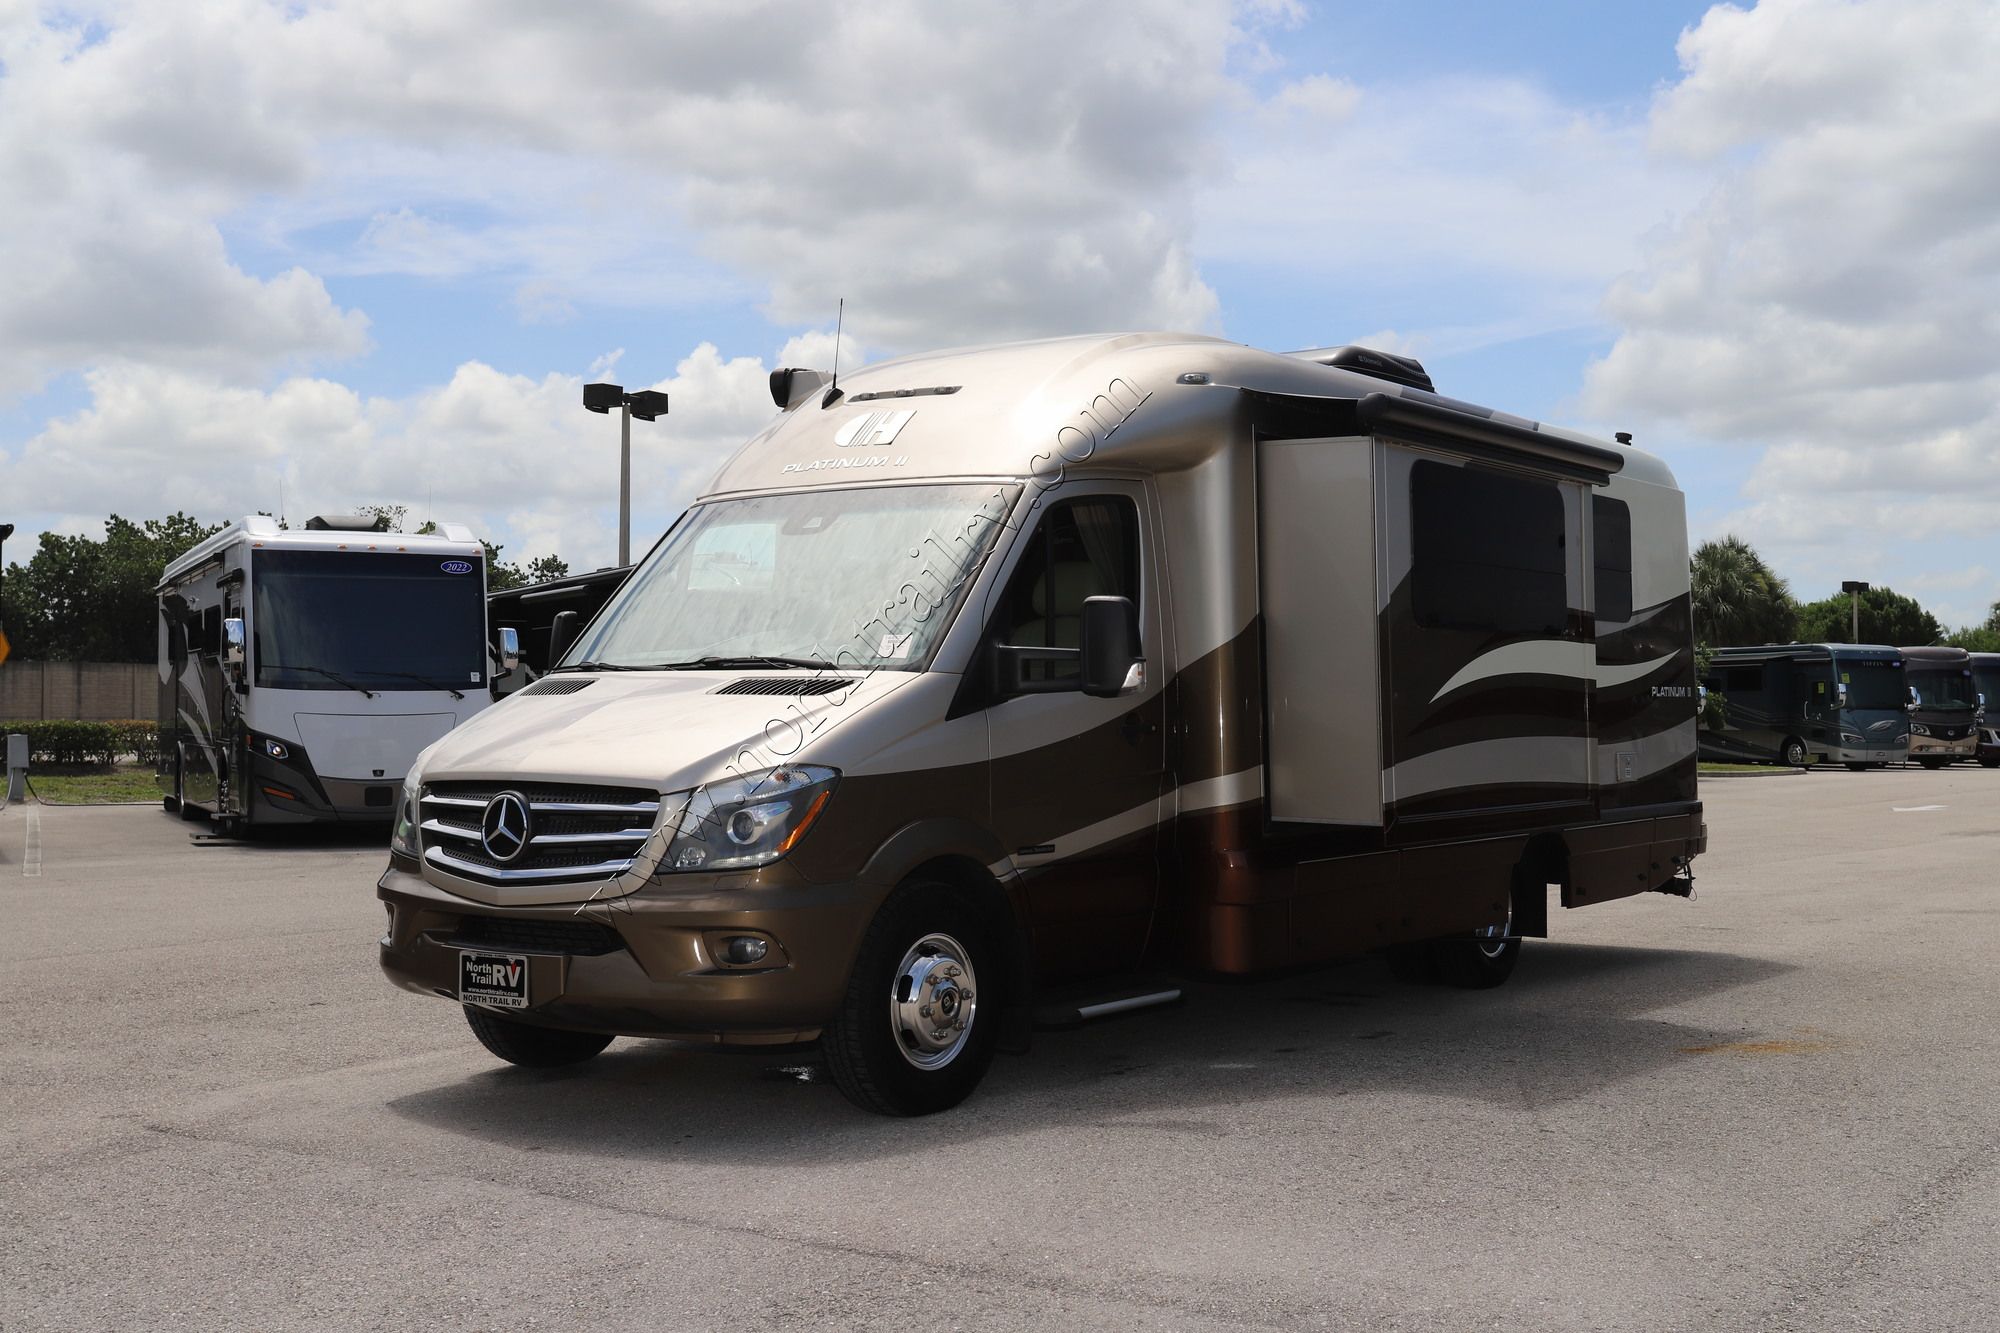 Used 2016 Coach House Platinum Ii 241 XL Class C  For Sale